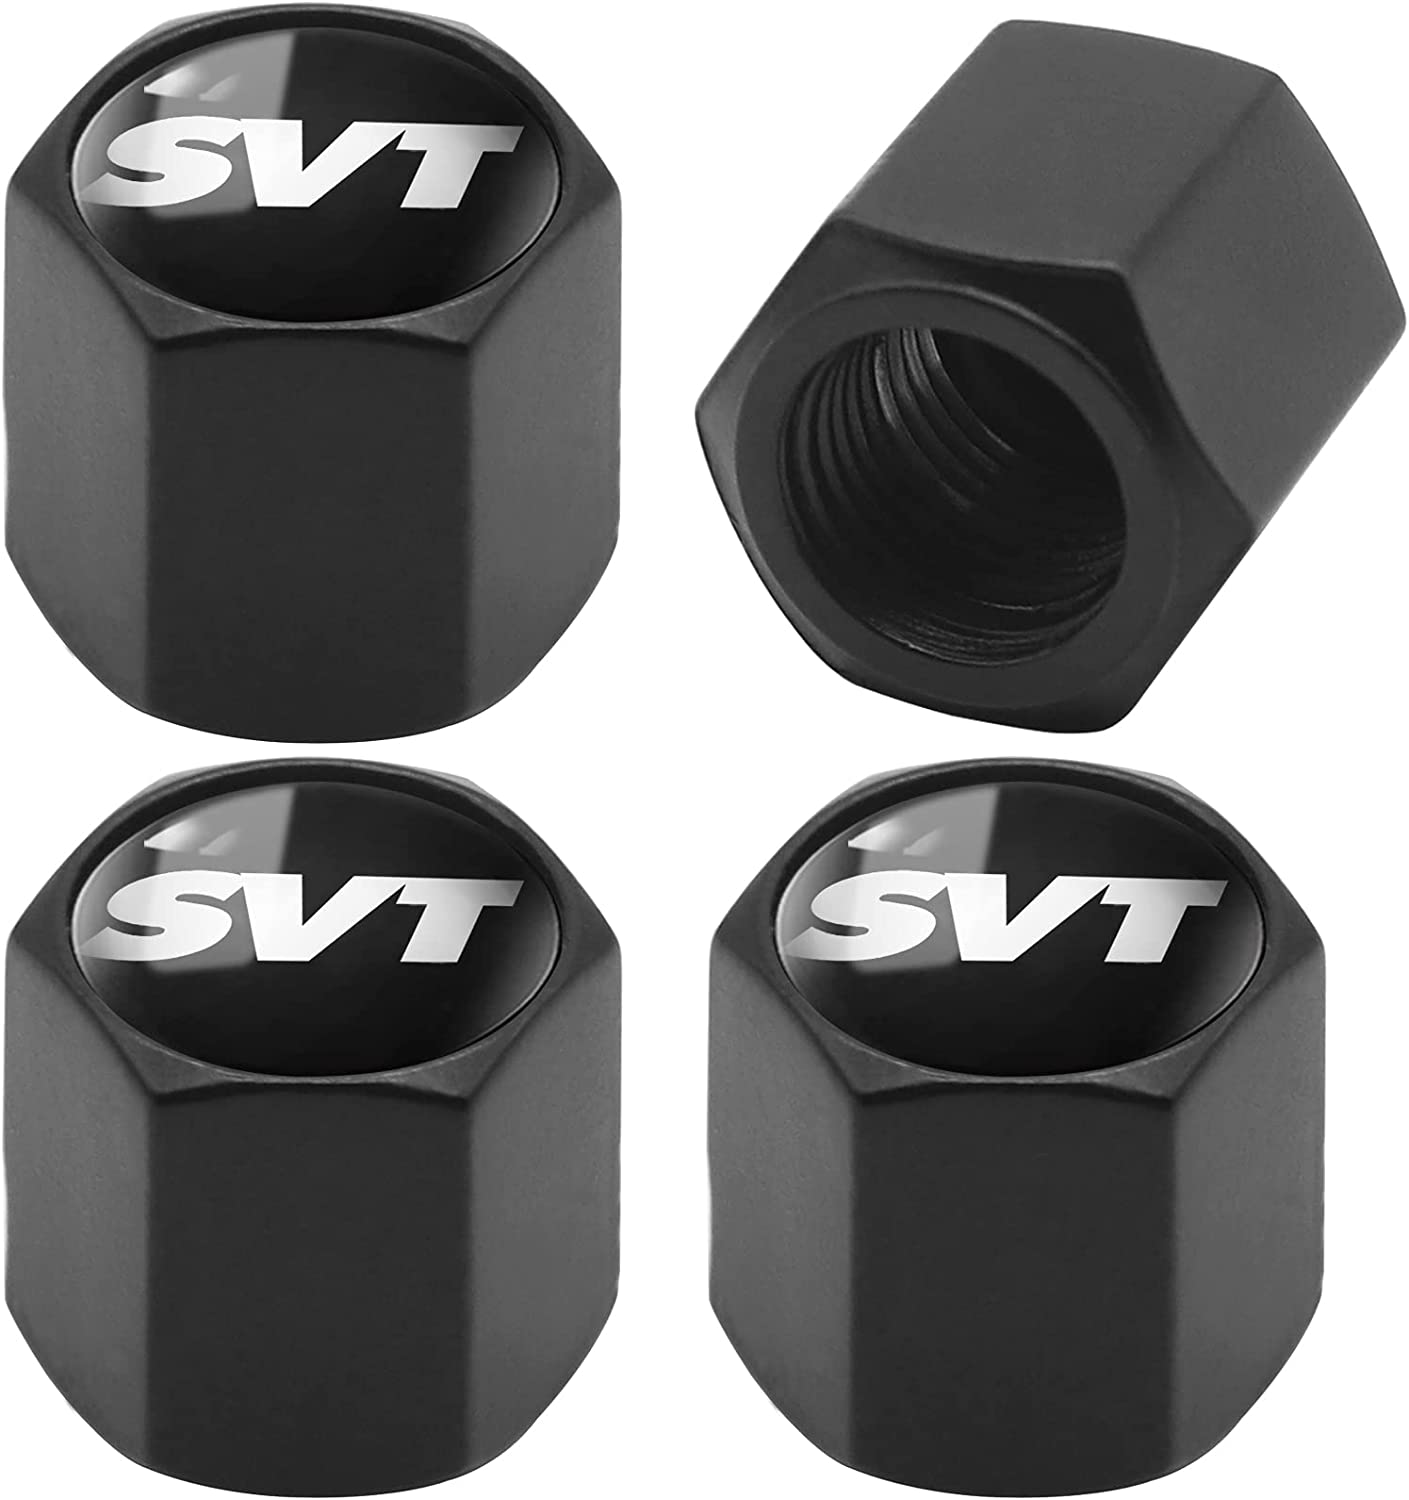 Tire Stem Valve Caps with SS, Universal Valve Stem Cap, Tire Stem Covers for Cars, SUV, Bike，Bicycle, Trucks, Motorcycles, 4PCS